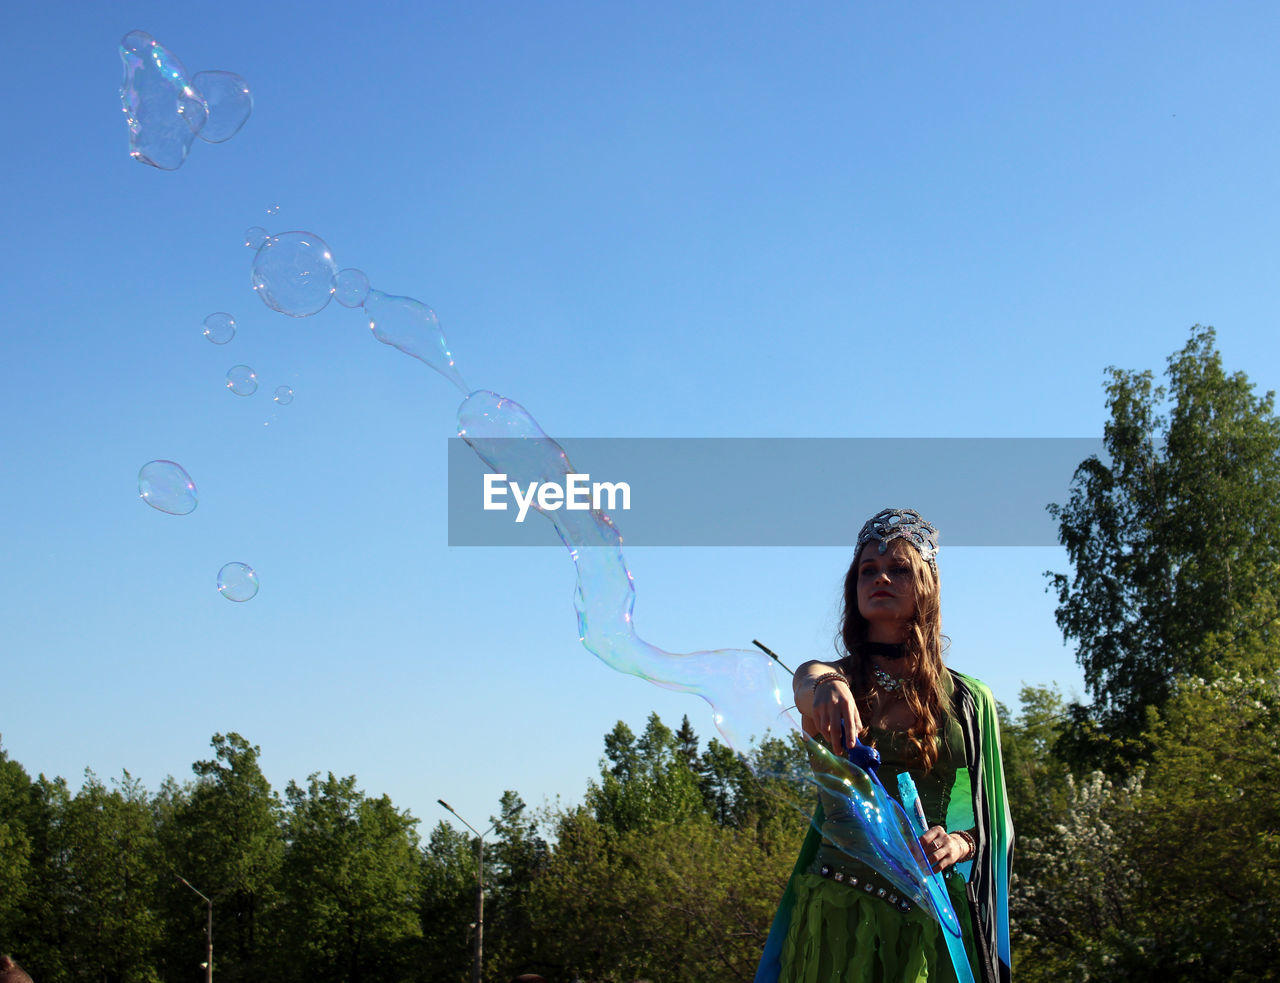 bubble, nature, blowing, one person, sky, bubble wand, blue, plant, women, fragility, toy, clear sky, mid-air, day, happiness, soap sud, childhood, tree, adult, fun, standing, sunny, motion, enjoyment, child, leisure activity, outdoors, flying, waist up, copy space, casual clothing, emotion, holding, carefree, sunlight, smiling, female, liquid bubble, young adult, looking, long hair, lifestyles, wind, low angle view, multi colored, hairstyle, environment, front view, summer, three quarter length, land